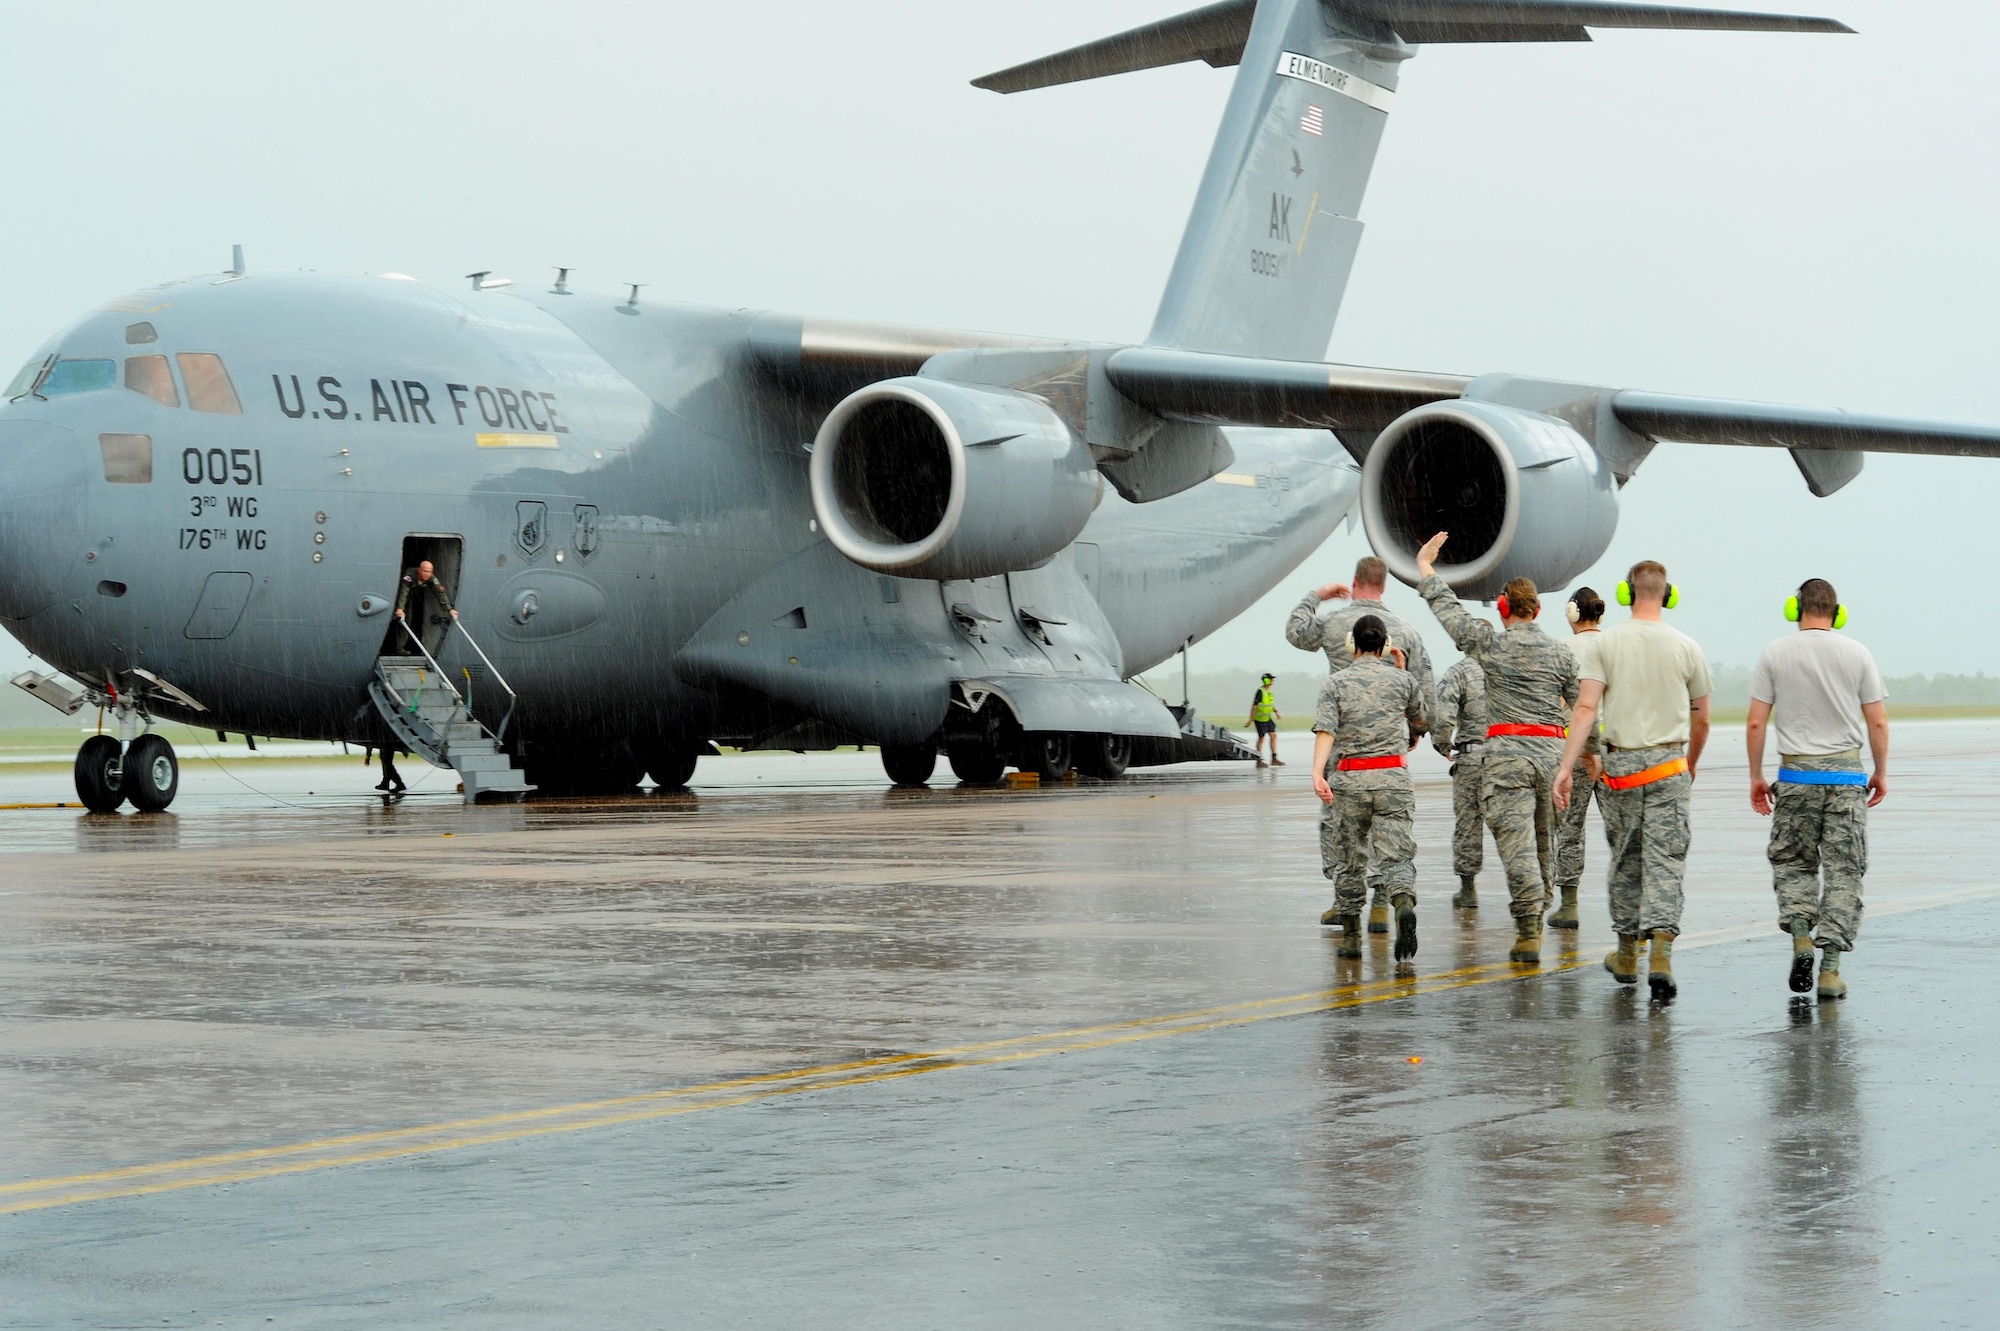 U.S. Airmen exit a C-17 Globemaster arriving from Joint Base Elmendorf-Richardson, Alaska, on the flightline at Royal Australian Air Force (RAAF) Base Tindal, Feb. 13, 2017. The Airmen arrived to support twelve F-22 Raptors, joining approximately 200 Airmen at RAAF Base Tindal as part of the Enhanced Air Cooperation (EAC) Initiative under the Force Posture Agreement between the U.S. and Australia. EAC creates the foundation for an enhanced rotational presence of U.S. military personnel in Australia to promote interoperability, build upon our already strong alliance, and reaffirm our commitment to the Indo-Asia-Pacific region.  (U.S. Air Force photo/Staff Sgt. Alexander Martinez)